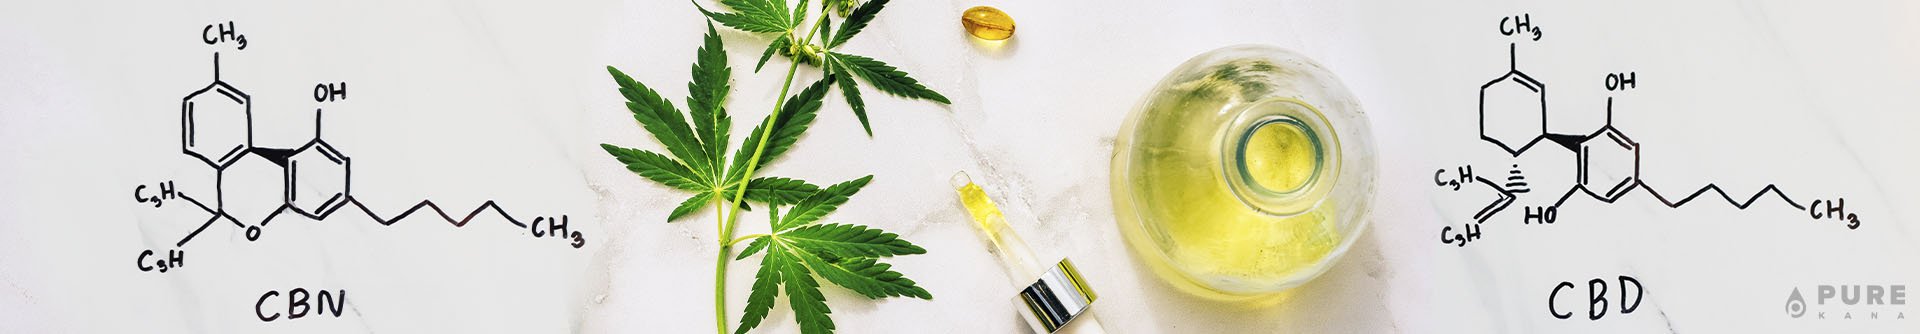 CBN vs. CBD: How They Affect Your Body Differently